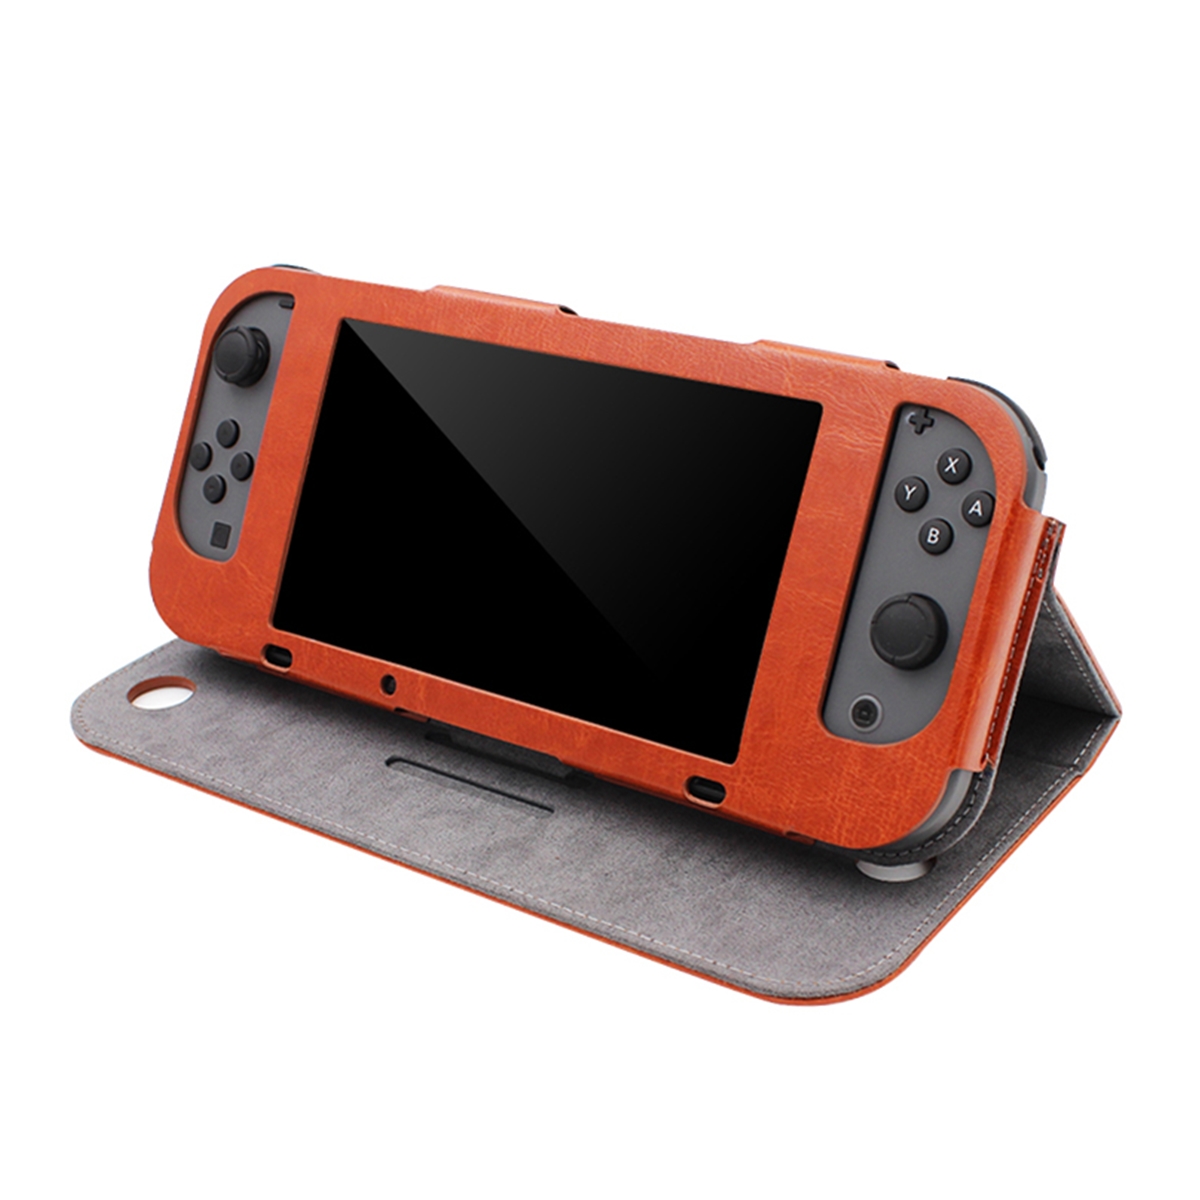 Magnetic PU Leather Protective Case Cover Skin Sleeve Stand For Nintendo Switch Game Console 96